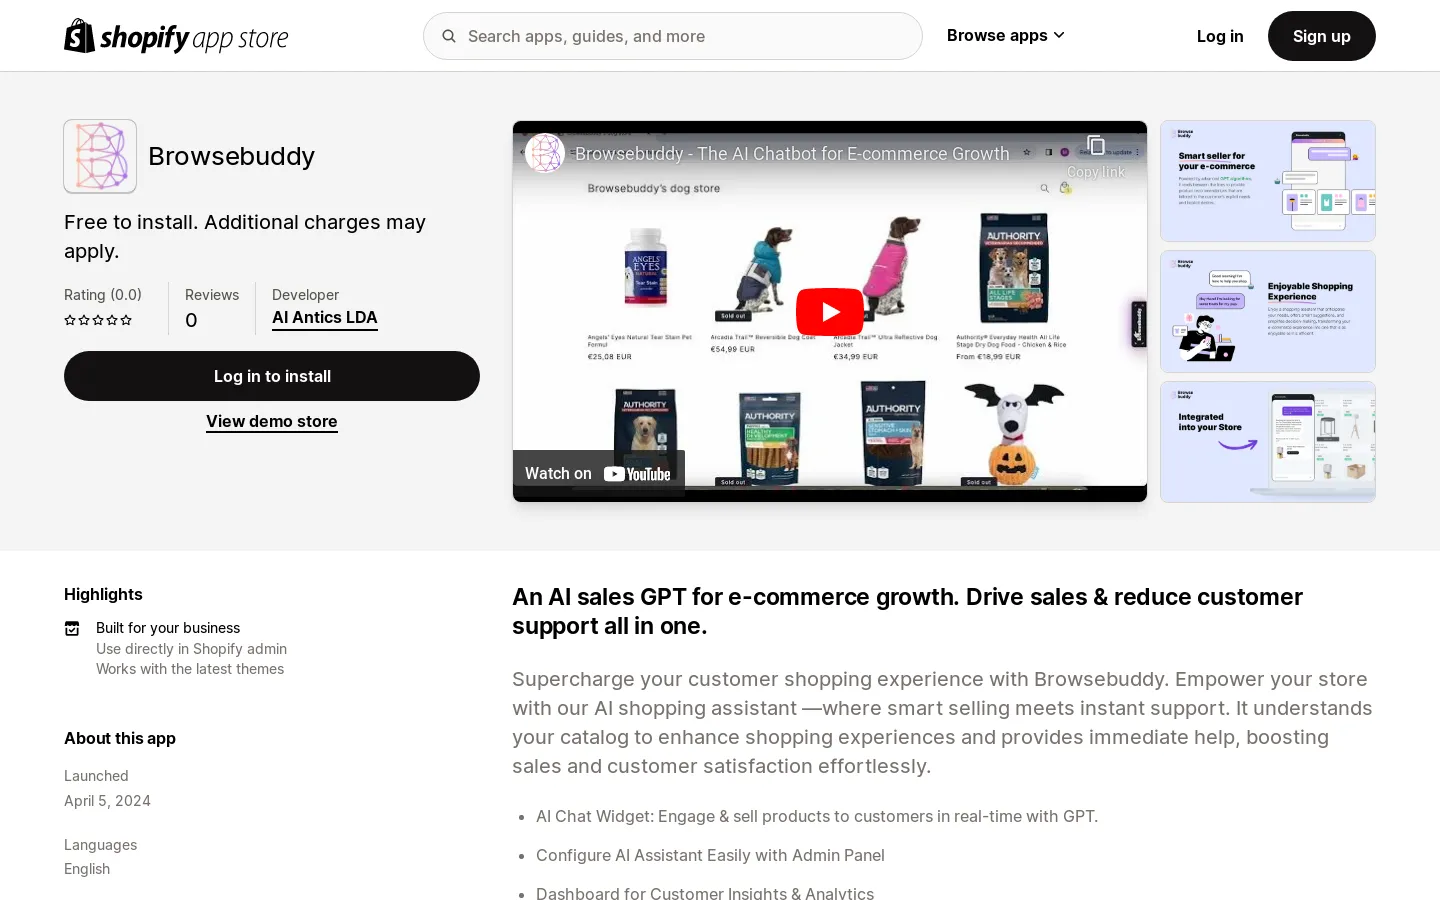 Browsebuddy - Browsebuddy - AI sales chat that sells products from store | Shopify App Store